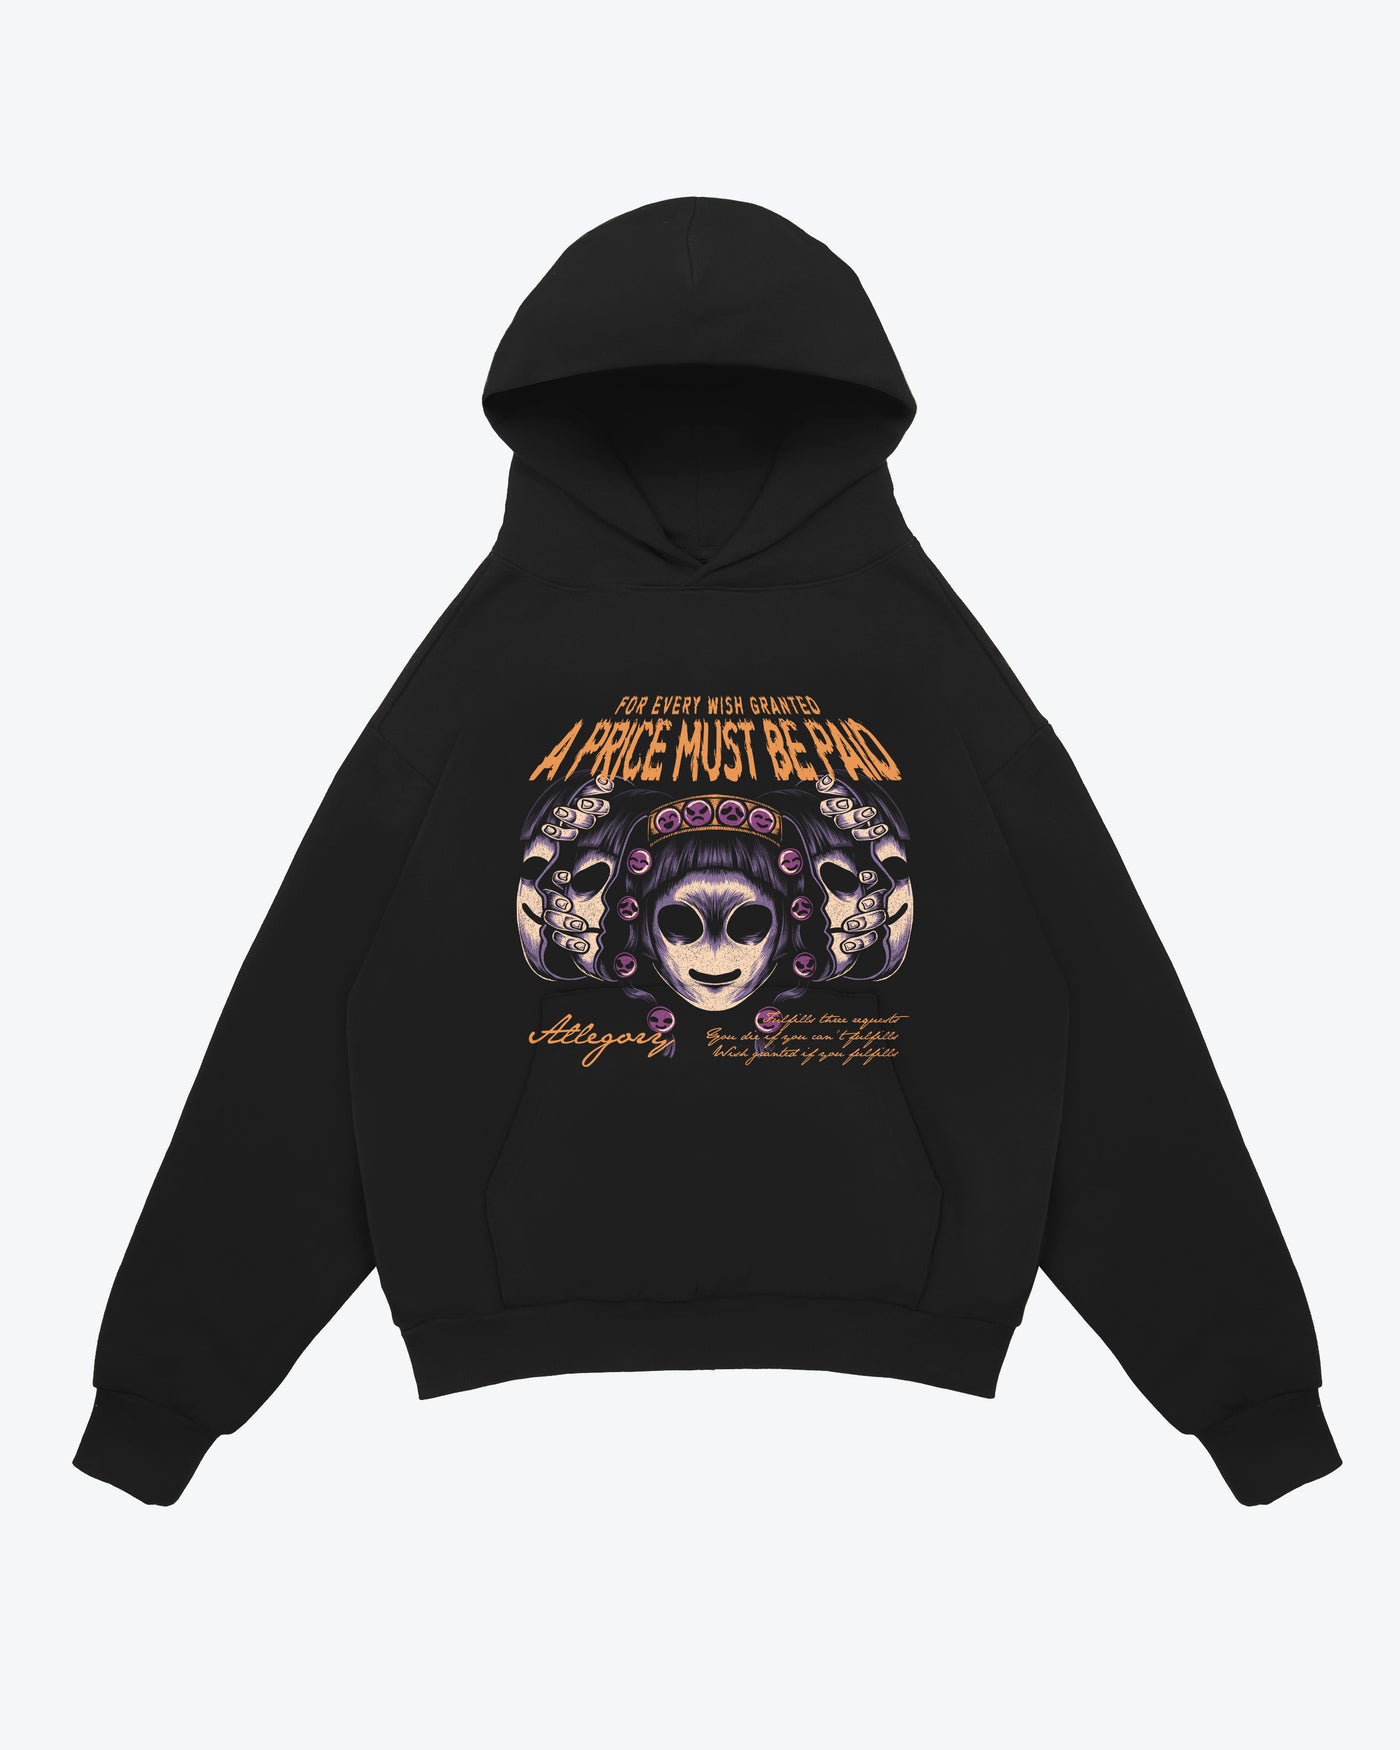 I'll Grant Your Wish Hoodie / Black